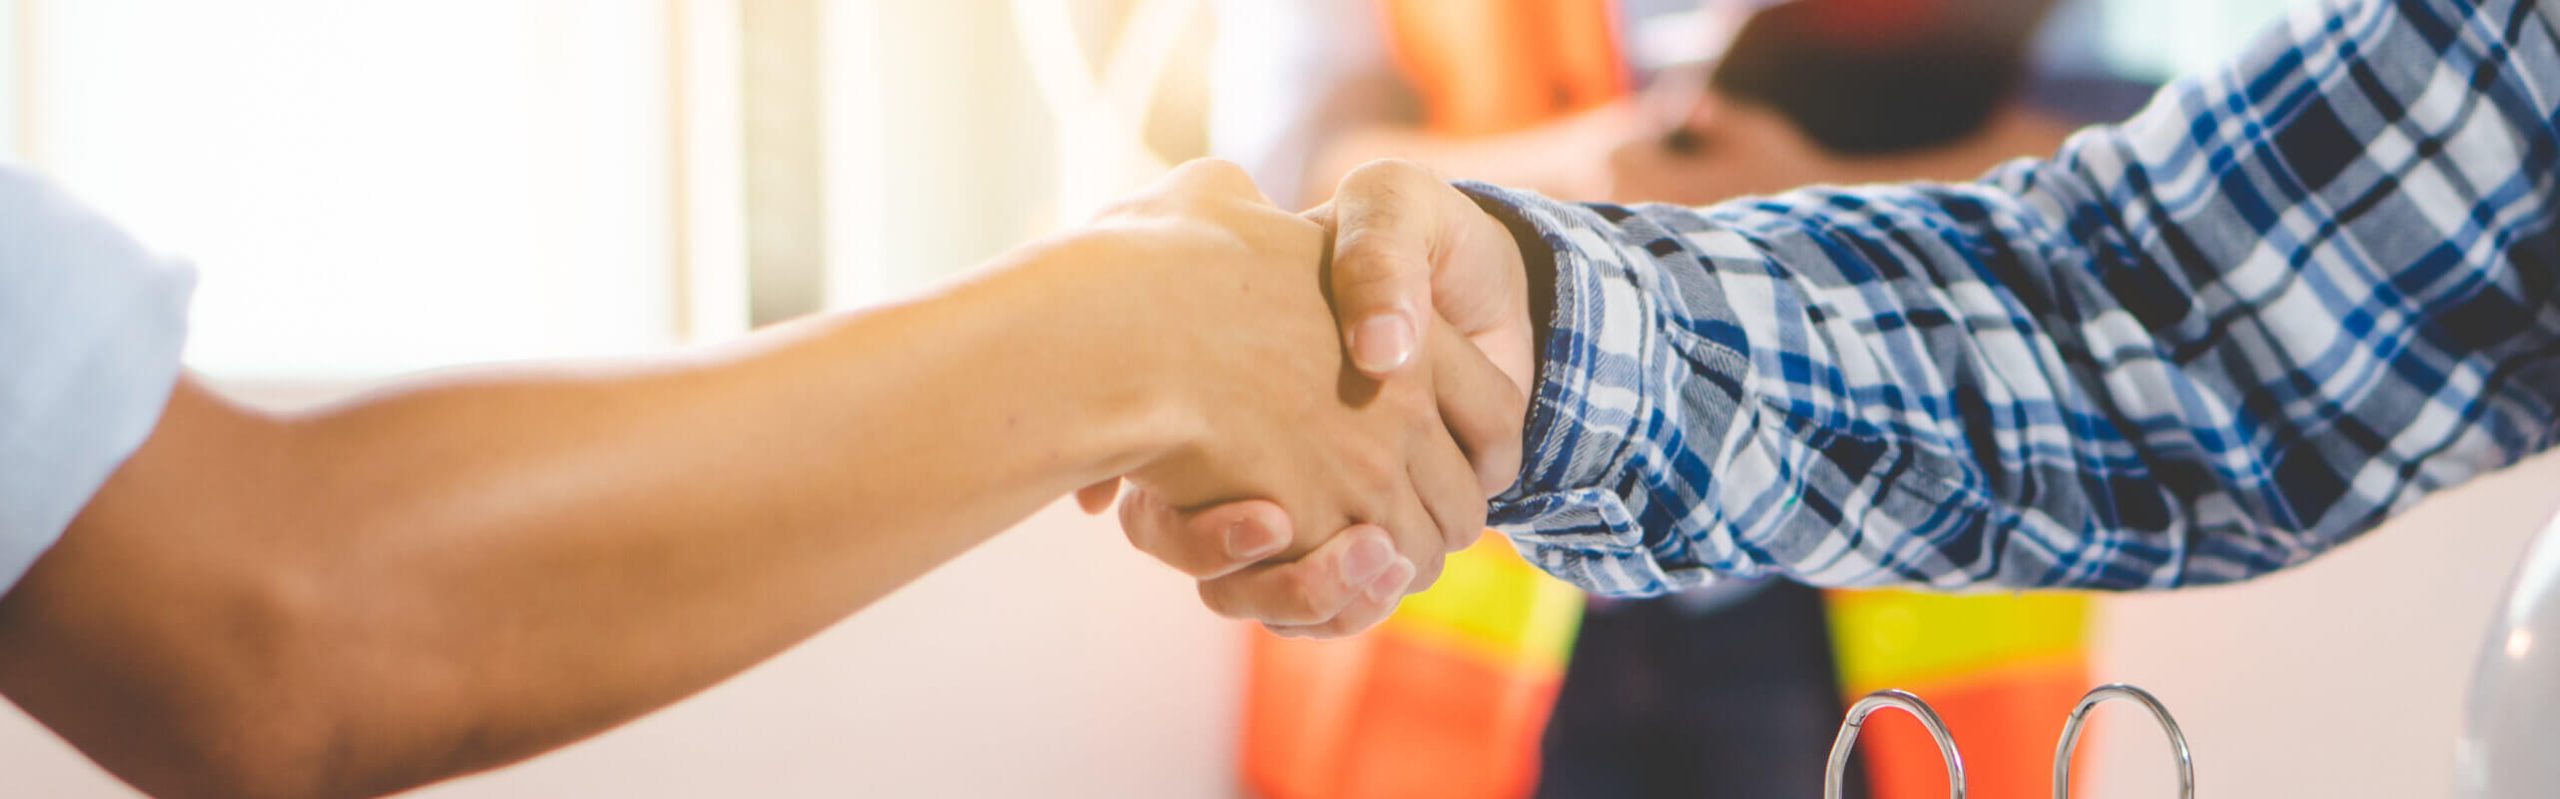 contractor shaking hand with client